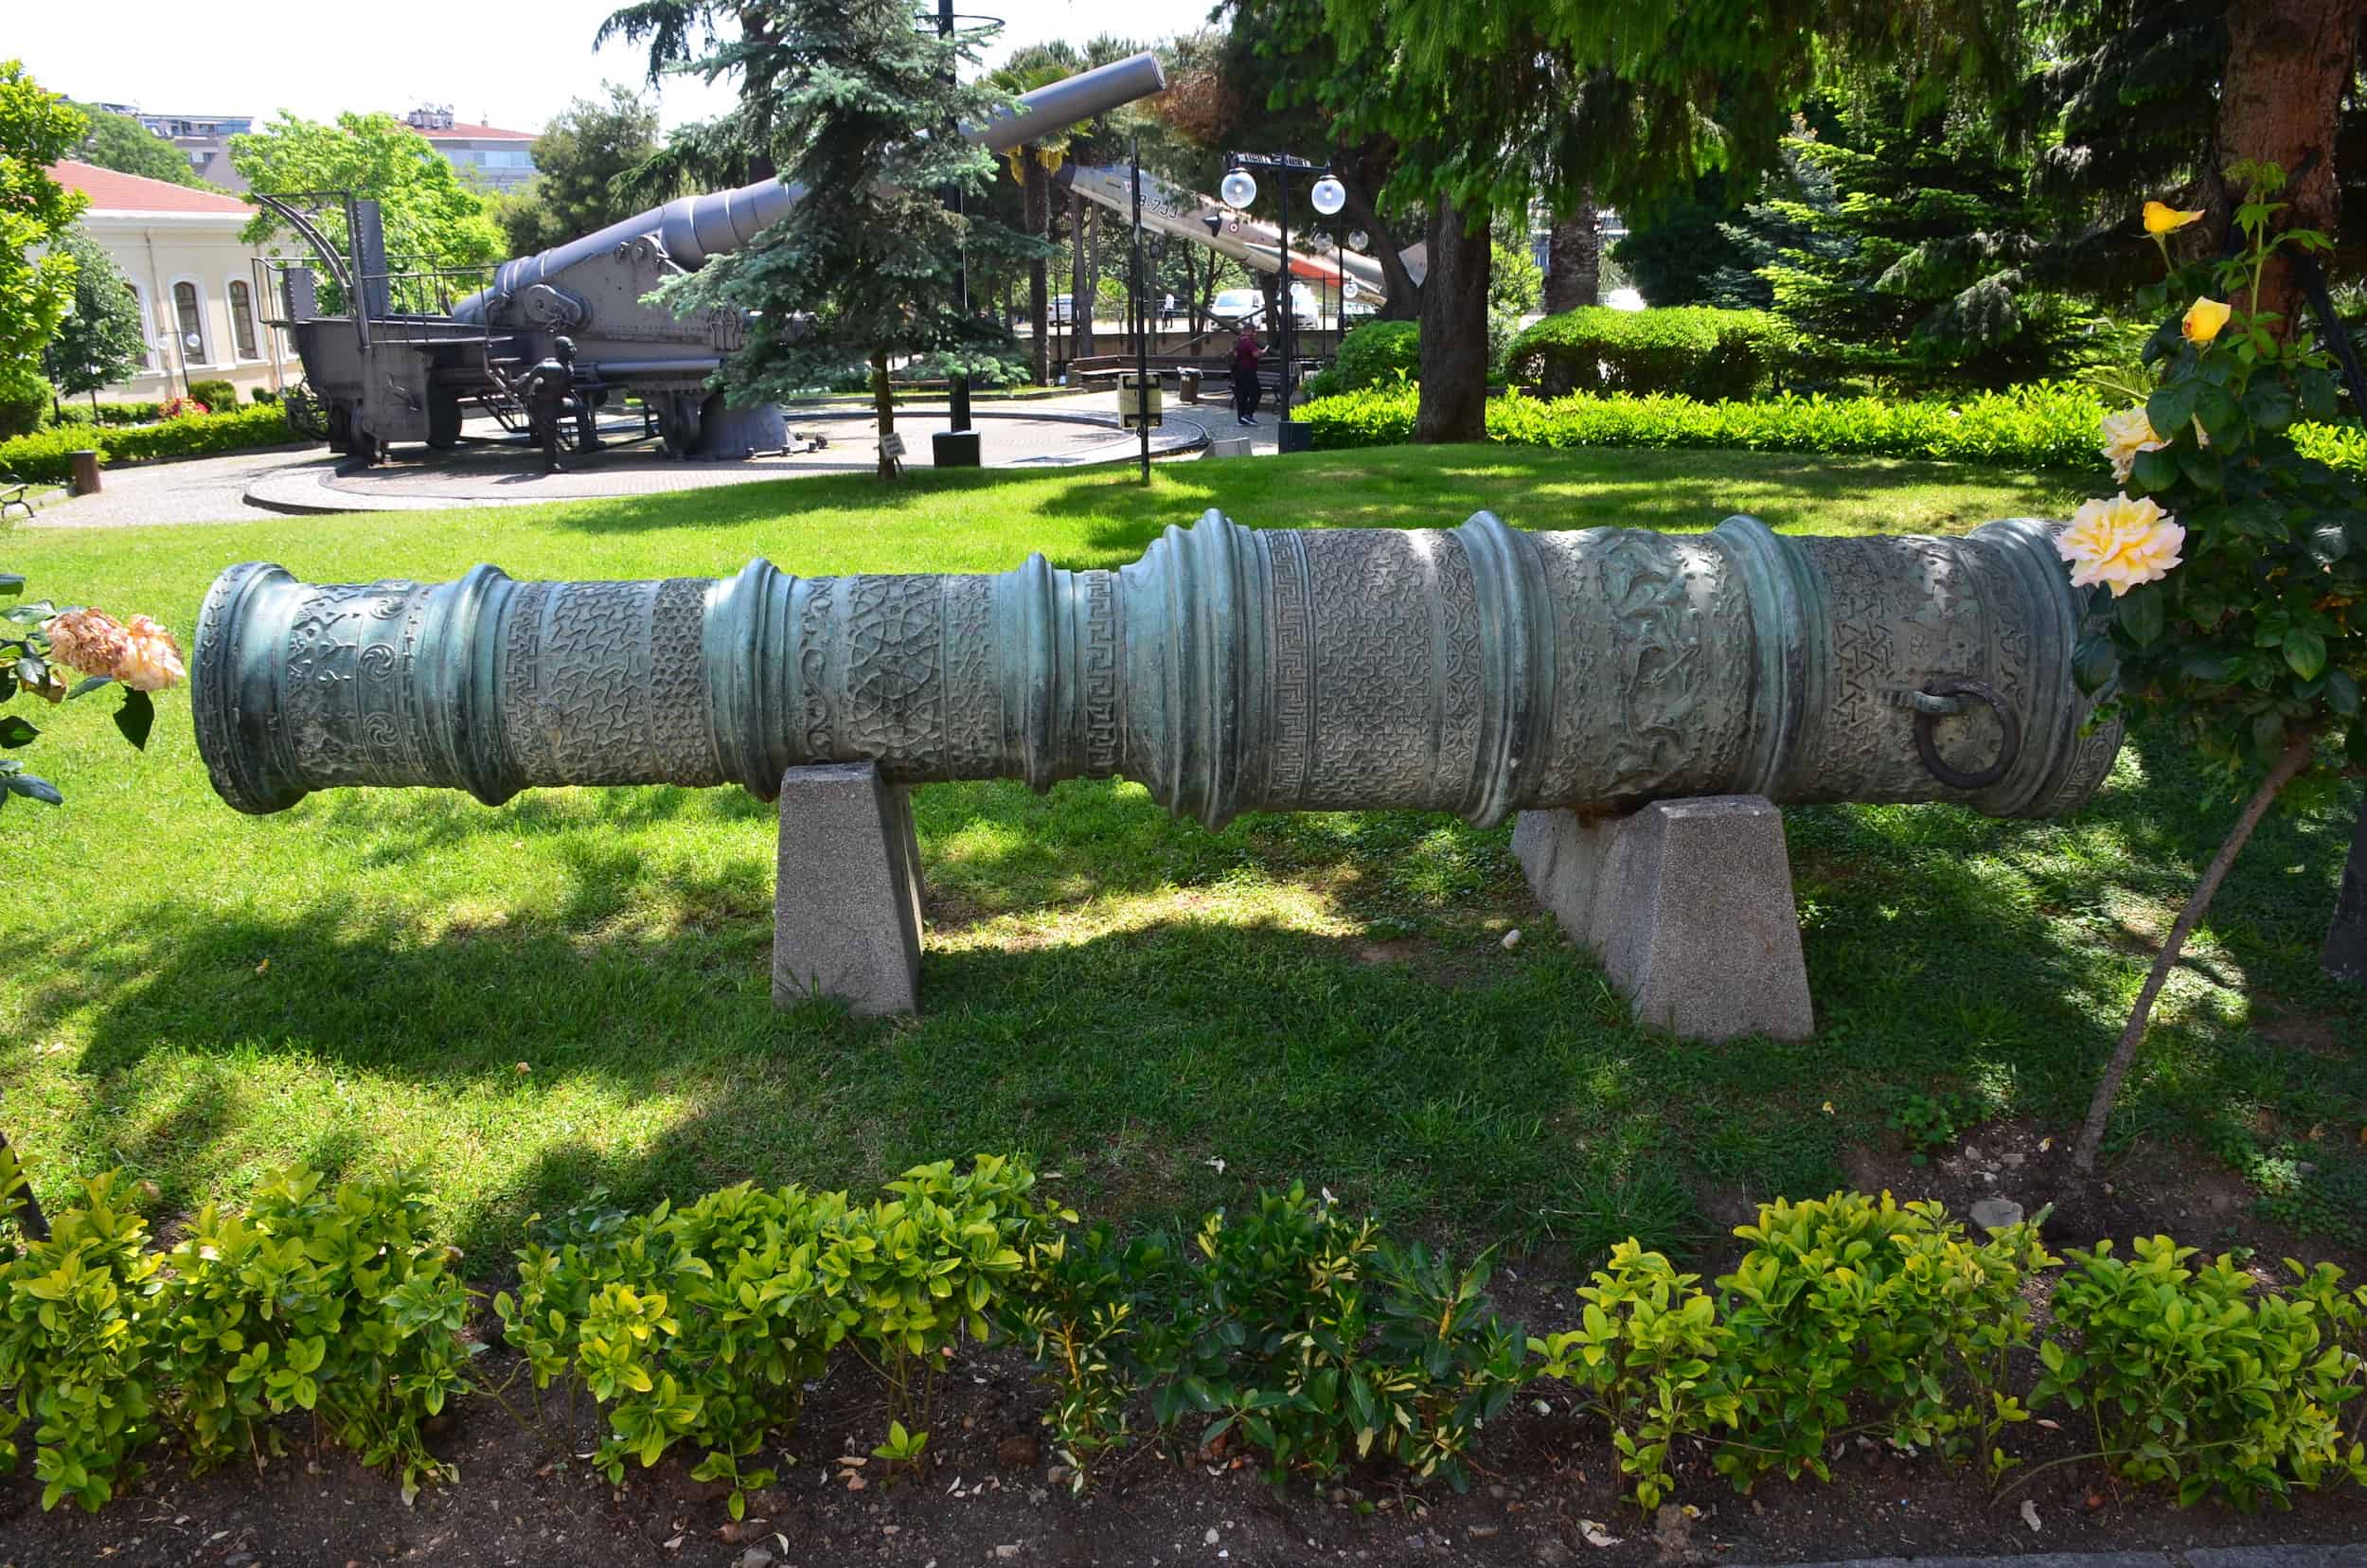 Decorative 15th century Ottoman bronze cannon at the Harbiye Military Museum in Istanbul, Turkey